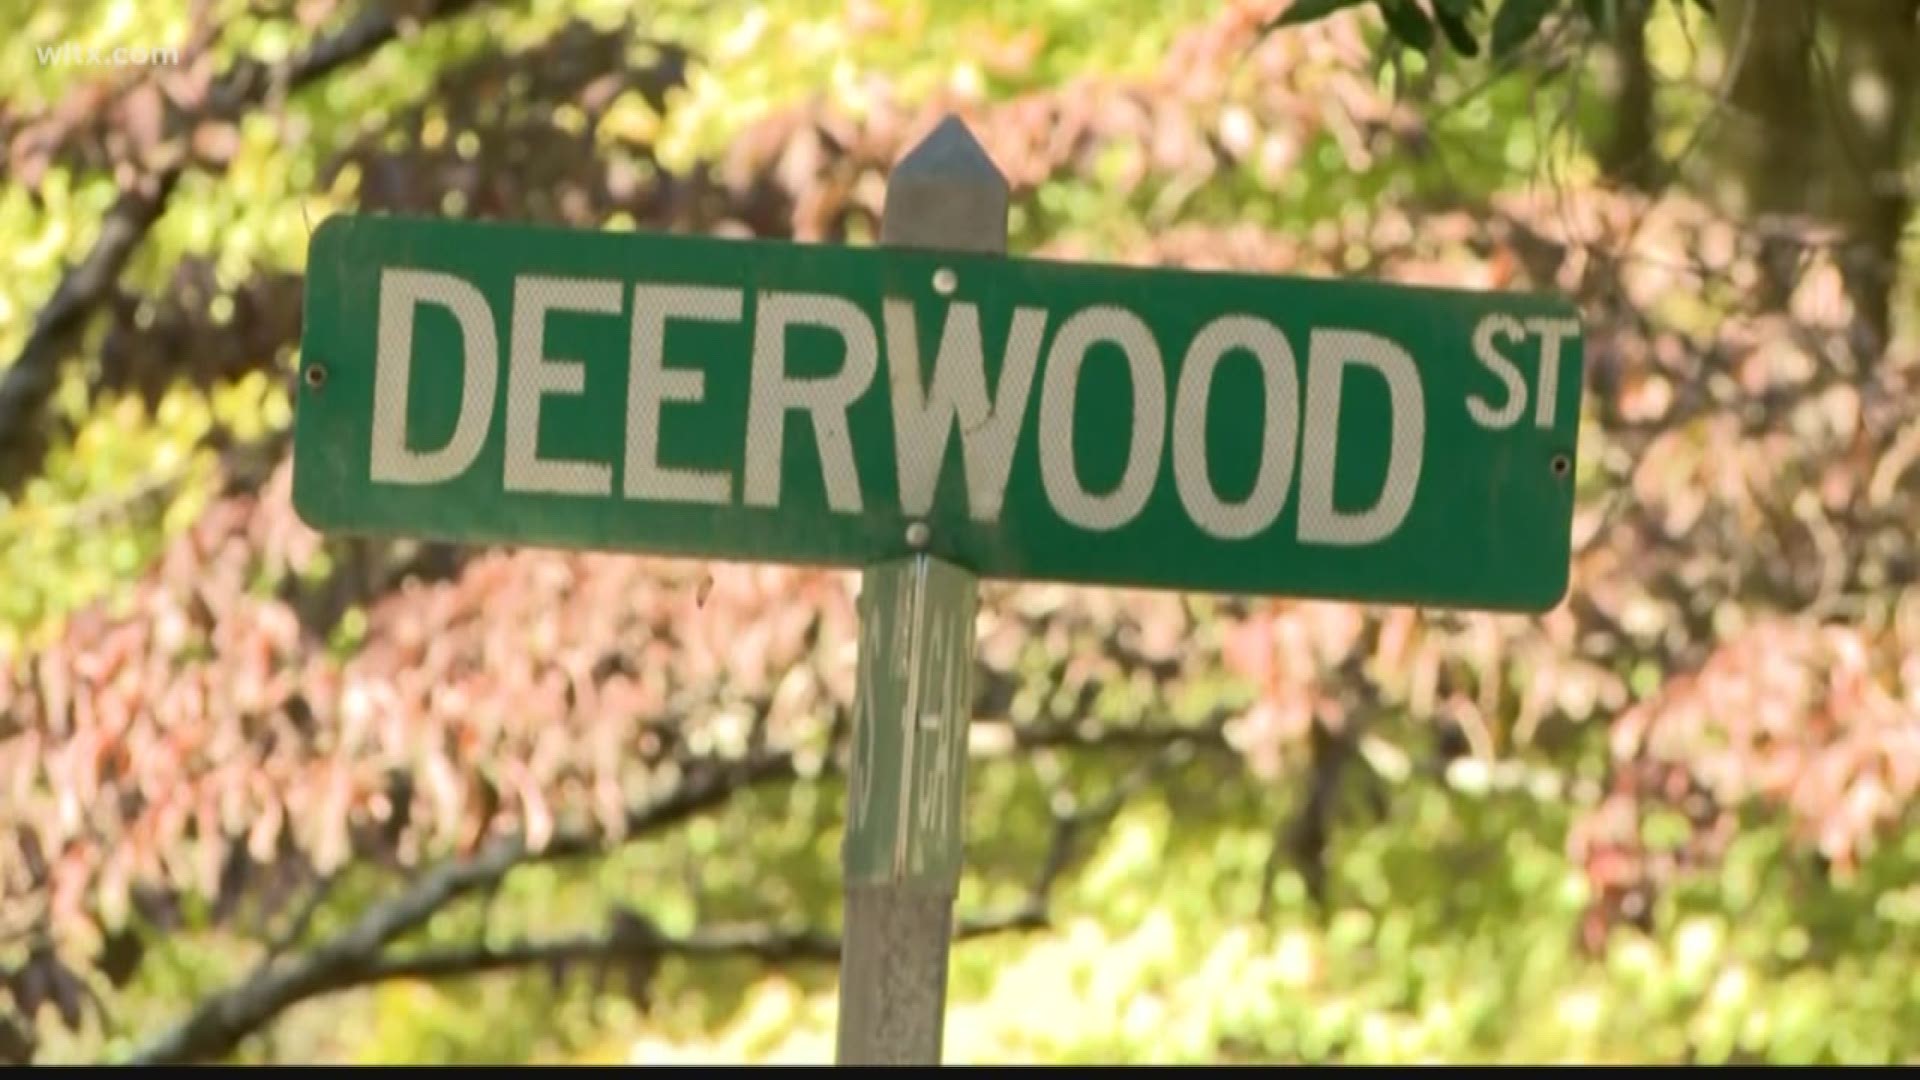 Richland county deputies are searching for whoever shot and killed a teenager in the 400 block of Deerwood street Sunday night around 9PM